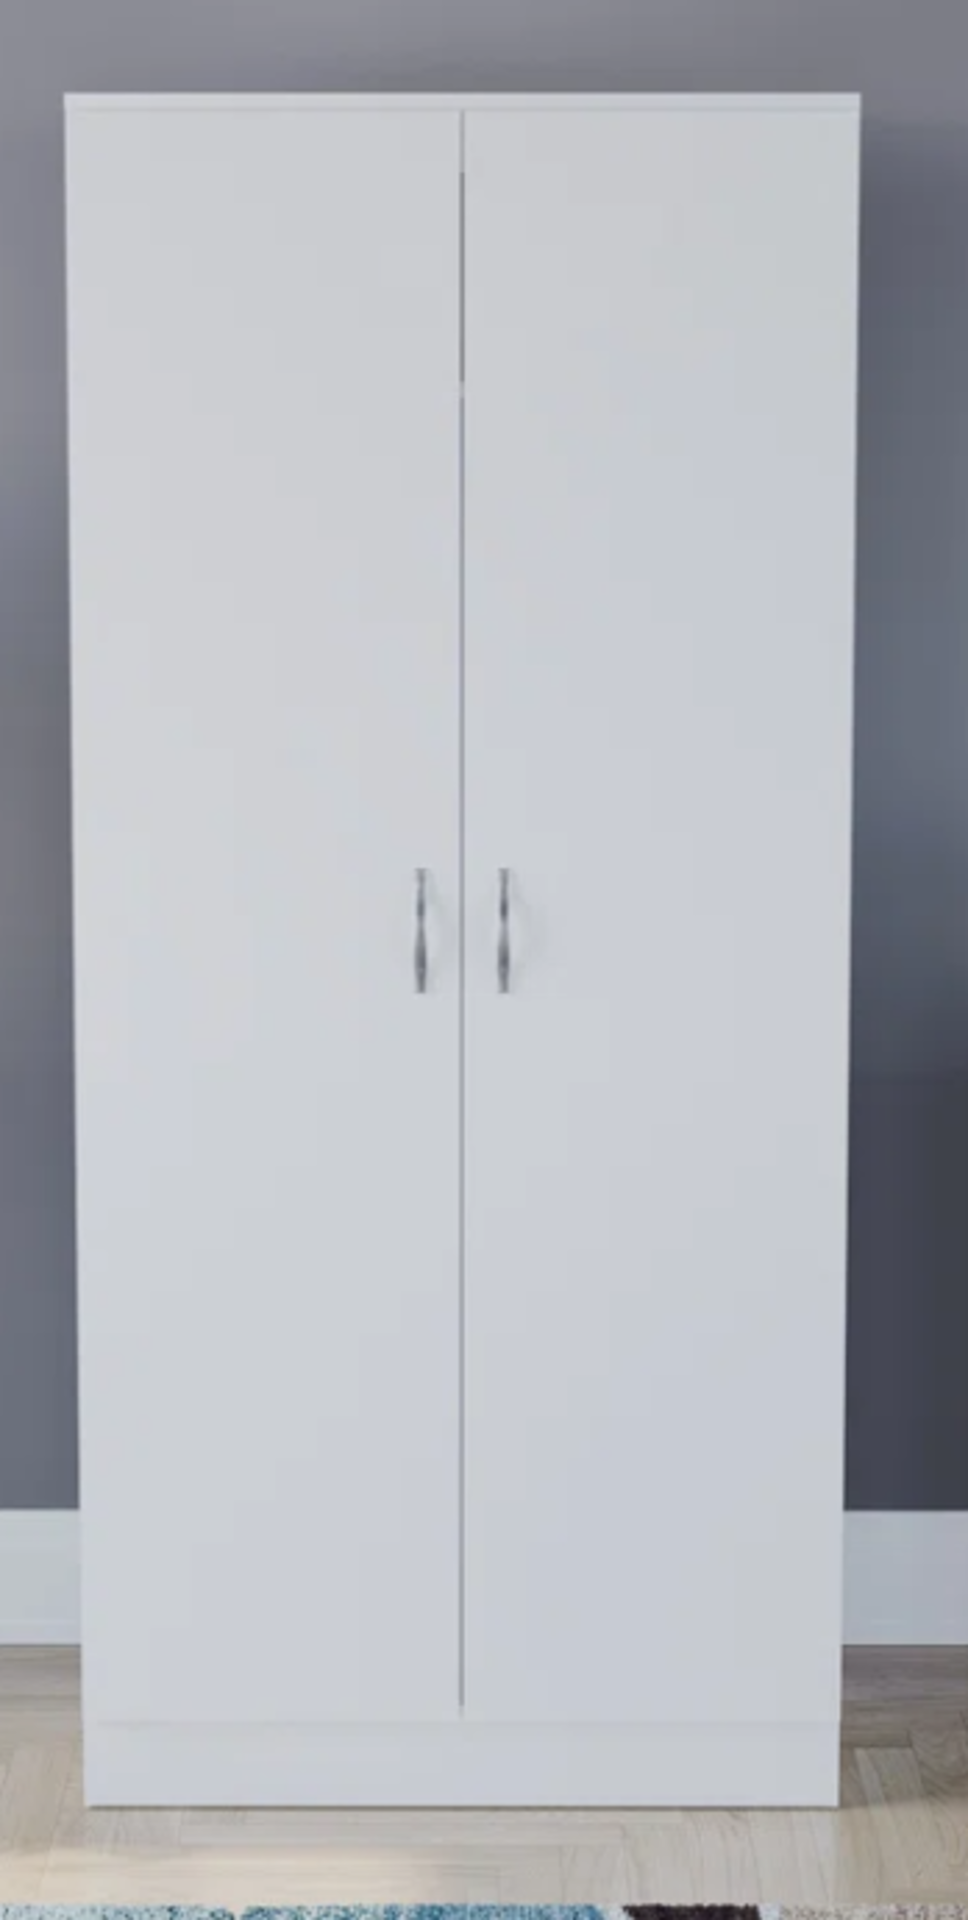 Mistaya 2 Door Manufactured Wood Wardrobe. RRP £155.99. Available in a range of colours to suit